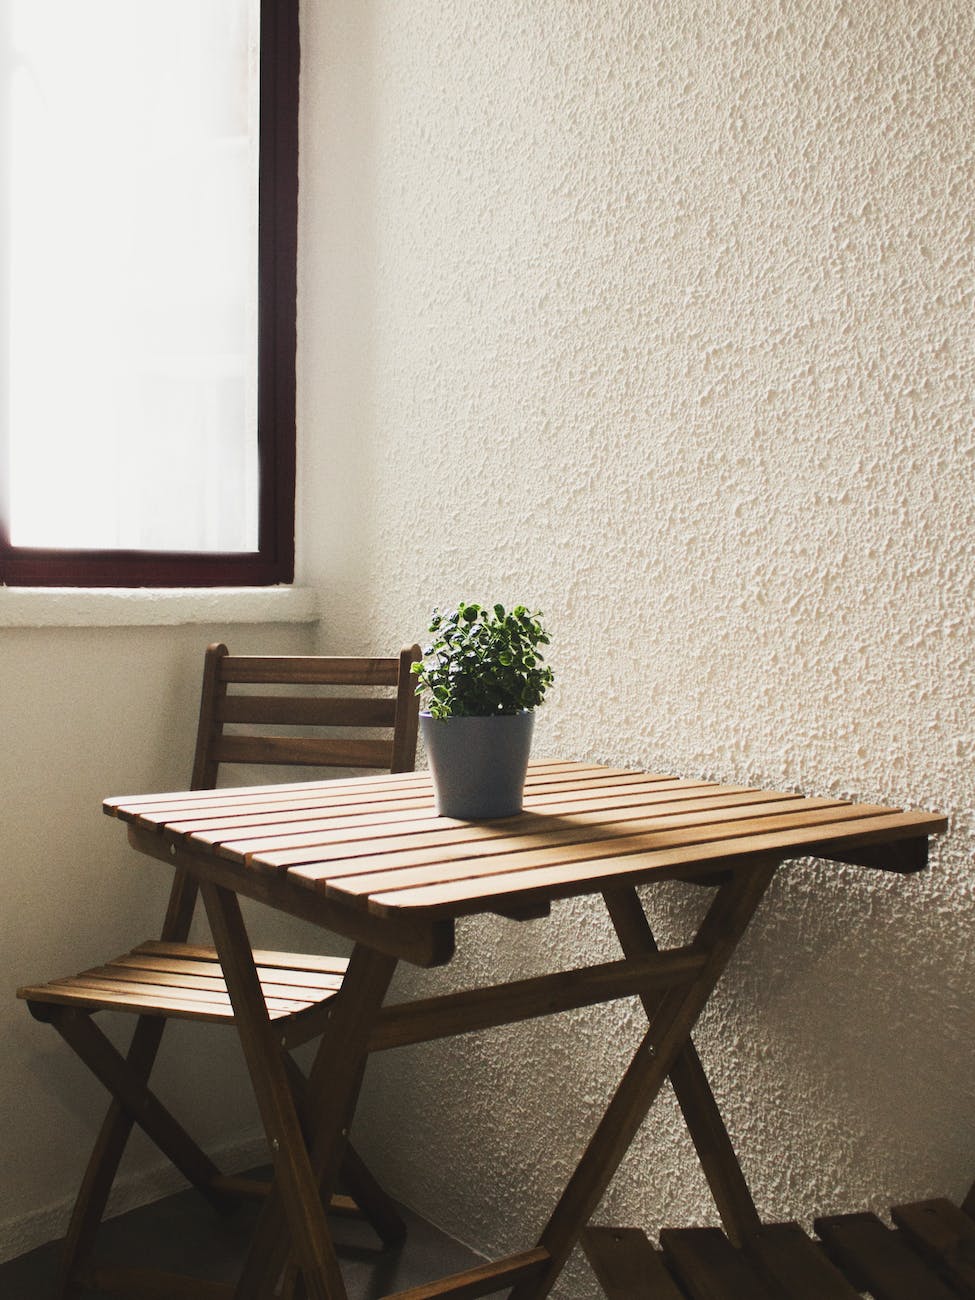 brown wooden table and chair